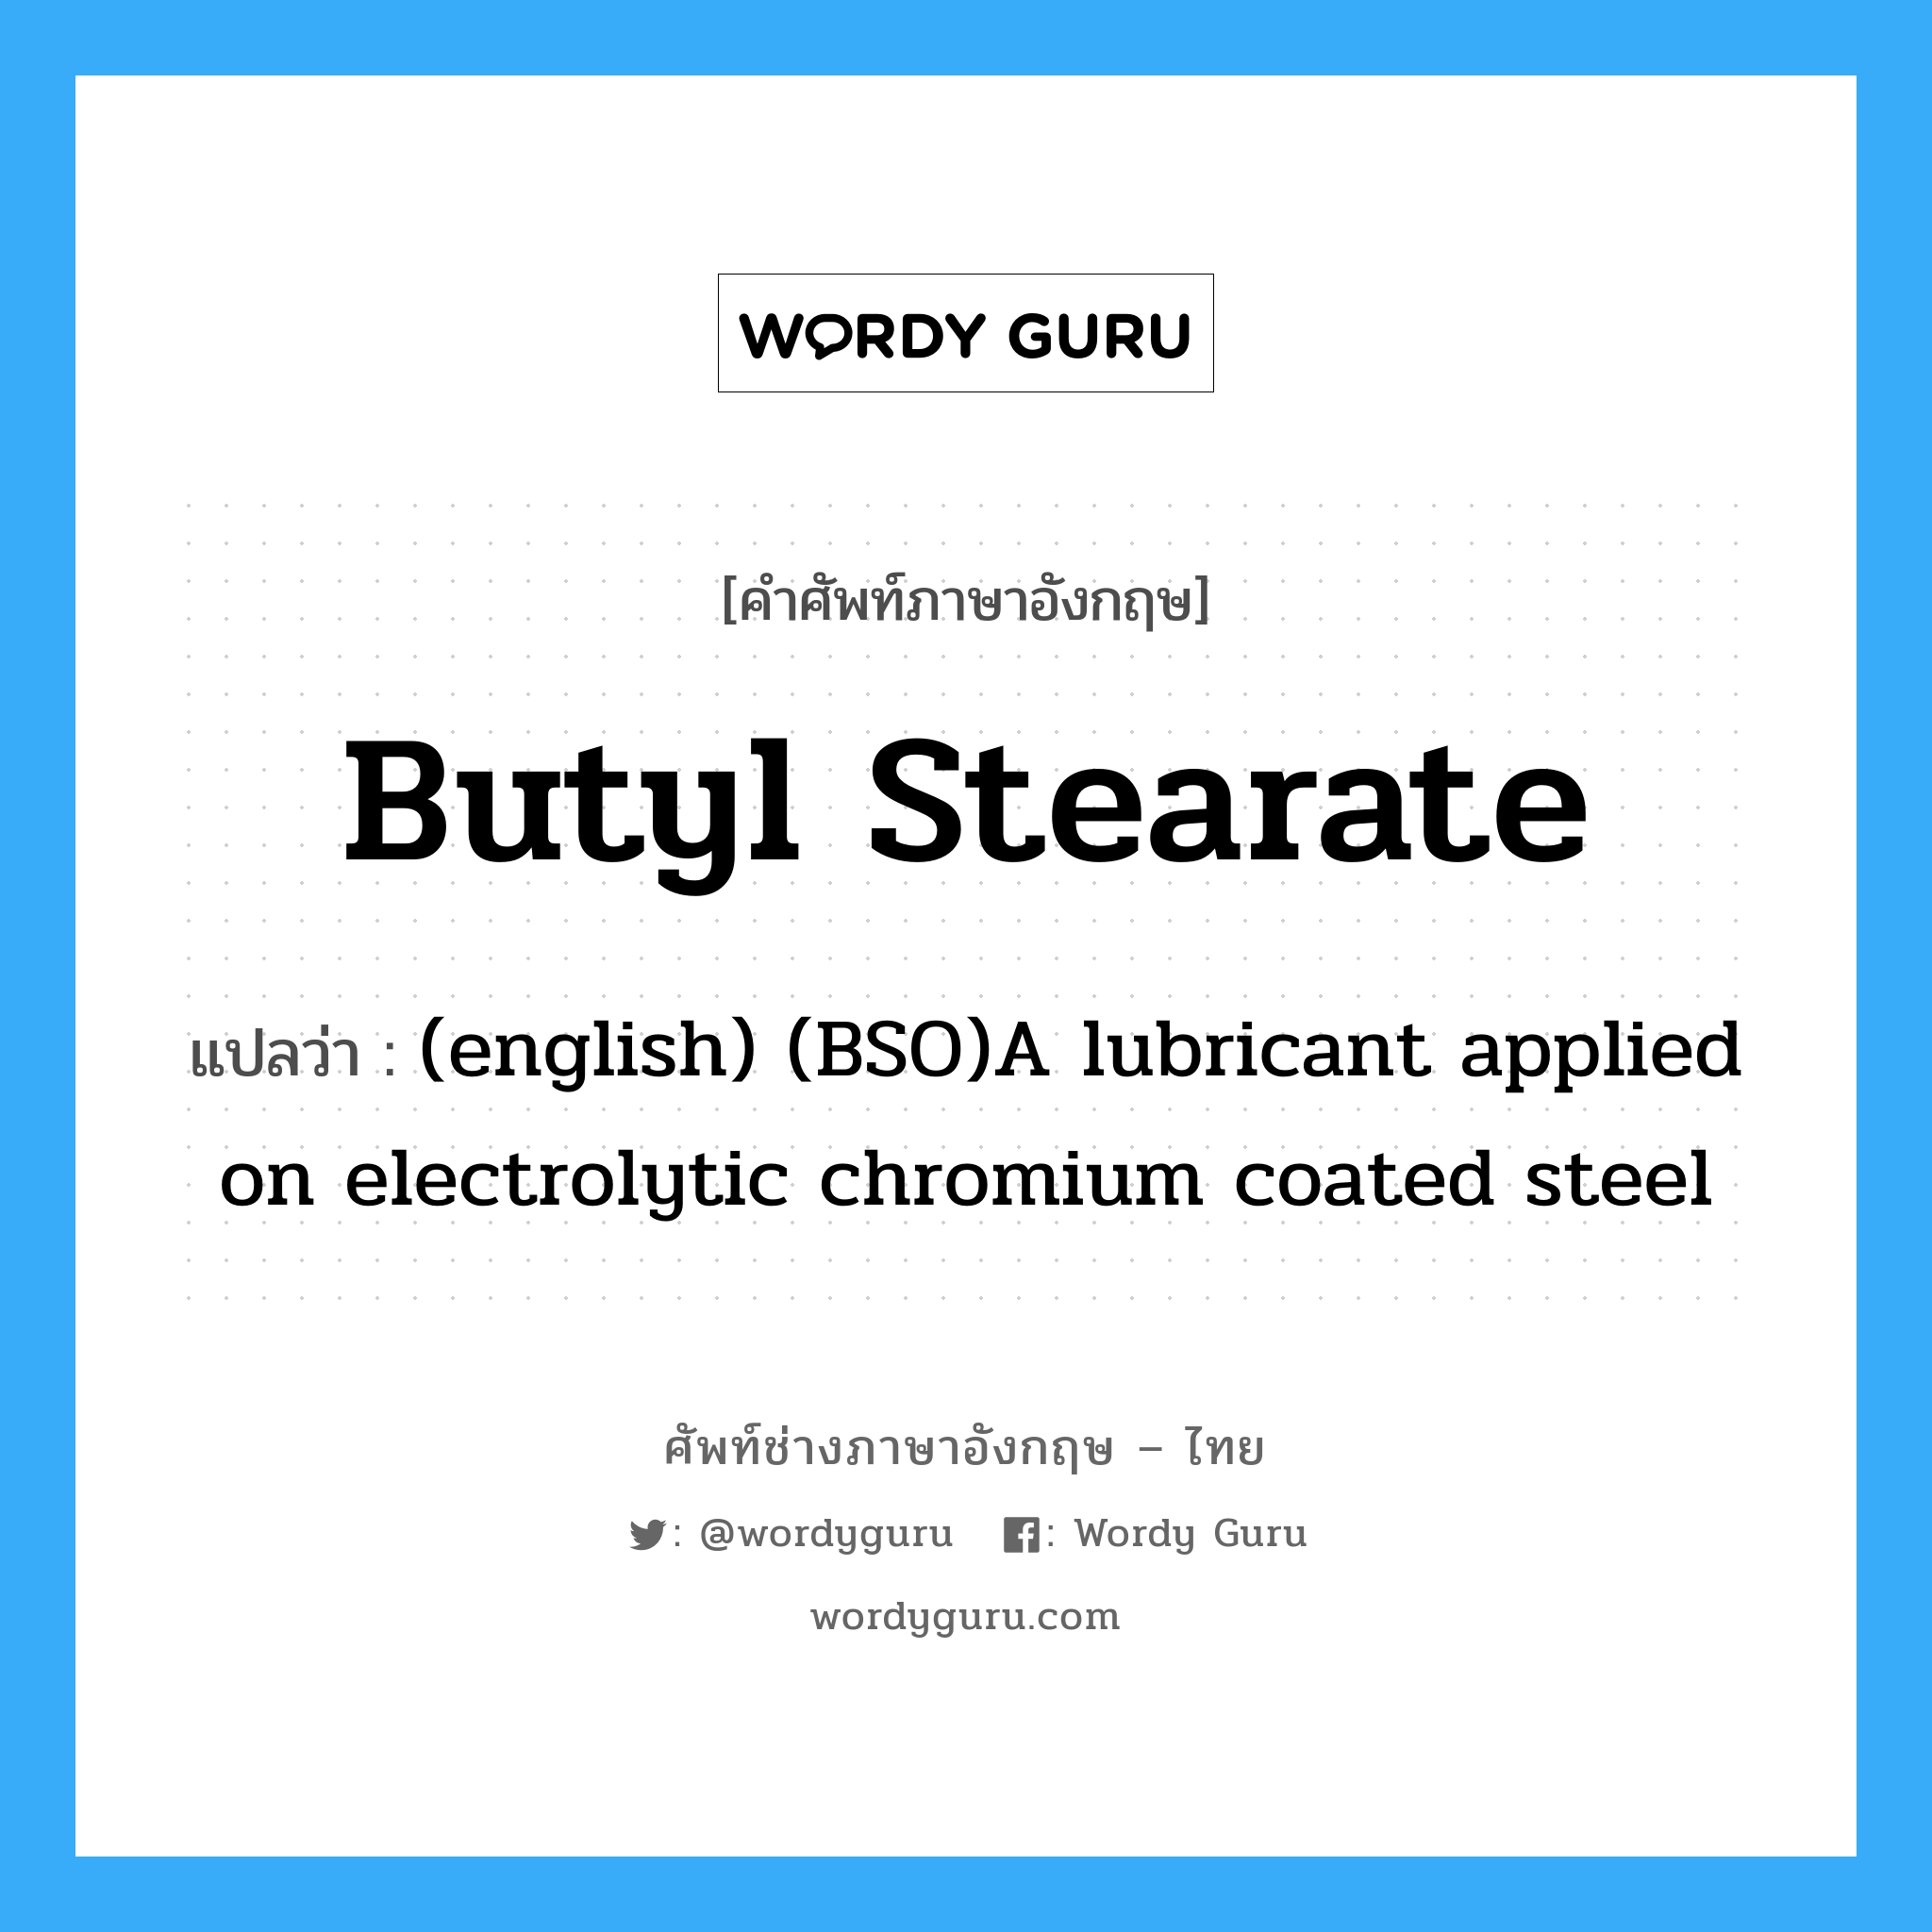 (english) (BSO)A lubricant applied on electrolytic chromium coated steel ภาษาอังกฤษ?, คำศัพท์ช่างภาษาอังกฤษ - ไทย (english) (BSO)A lubricant applied on electrolytic chromium coated steel คำศัพท์ภาษาอังกฤษ (english) (BSO)A lubricant applied on electrolytic chromium coated steel แปลว่า Butyl Stearate